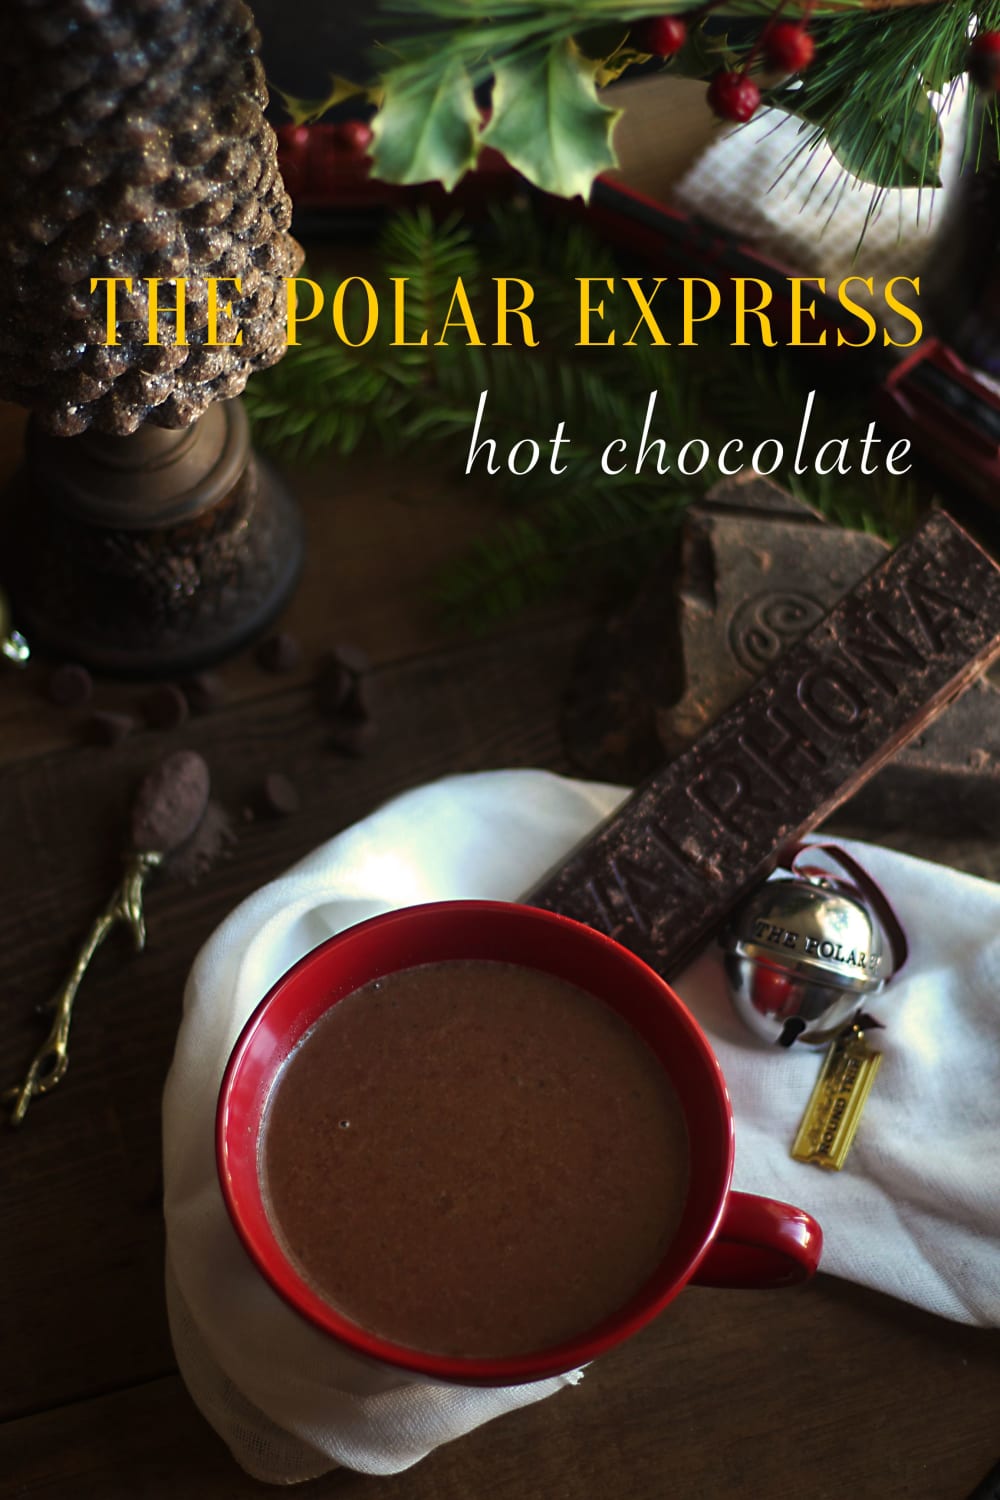 Hot chocolate from The Polar Express featuring Tom Hanks.